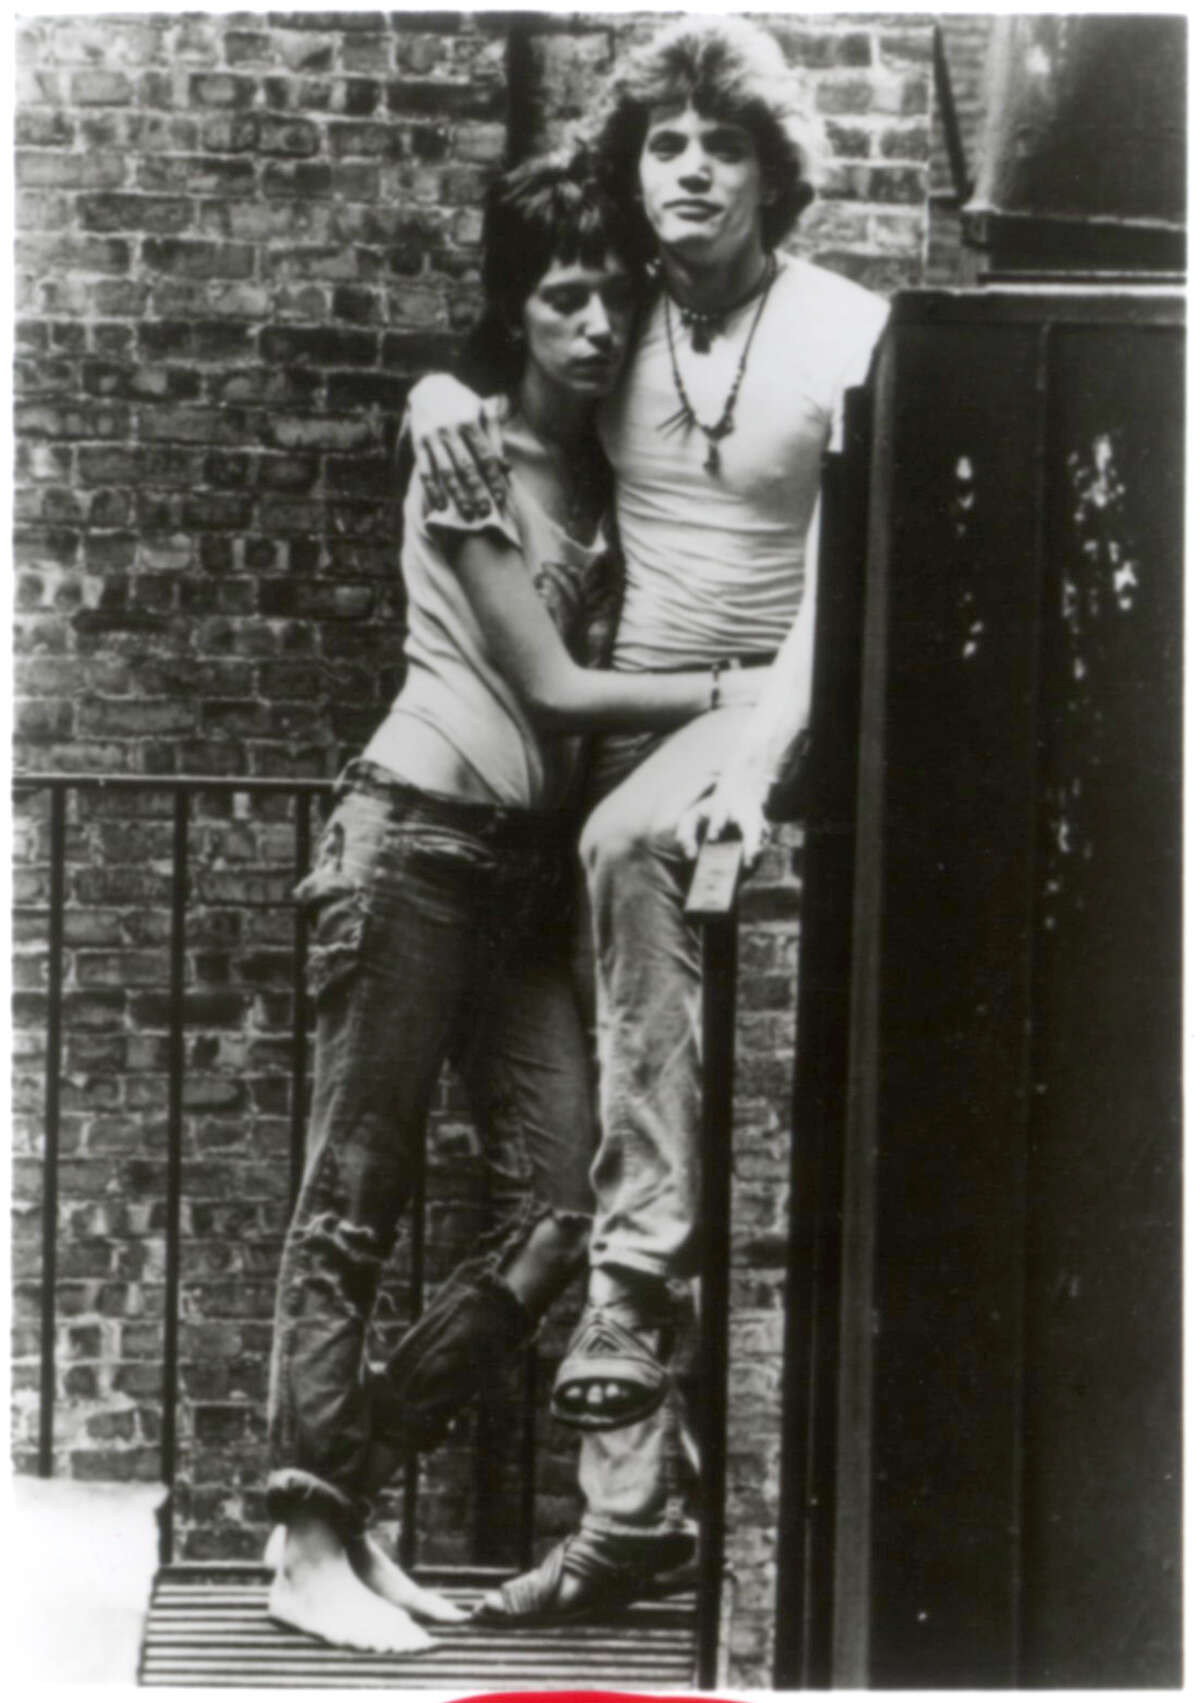 Singer-songwriter Patti Smith and art photographer Robert Mapplethorpe lived together at the Chelsea Hotel in New York City in the late 1960s.